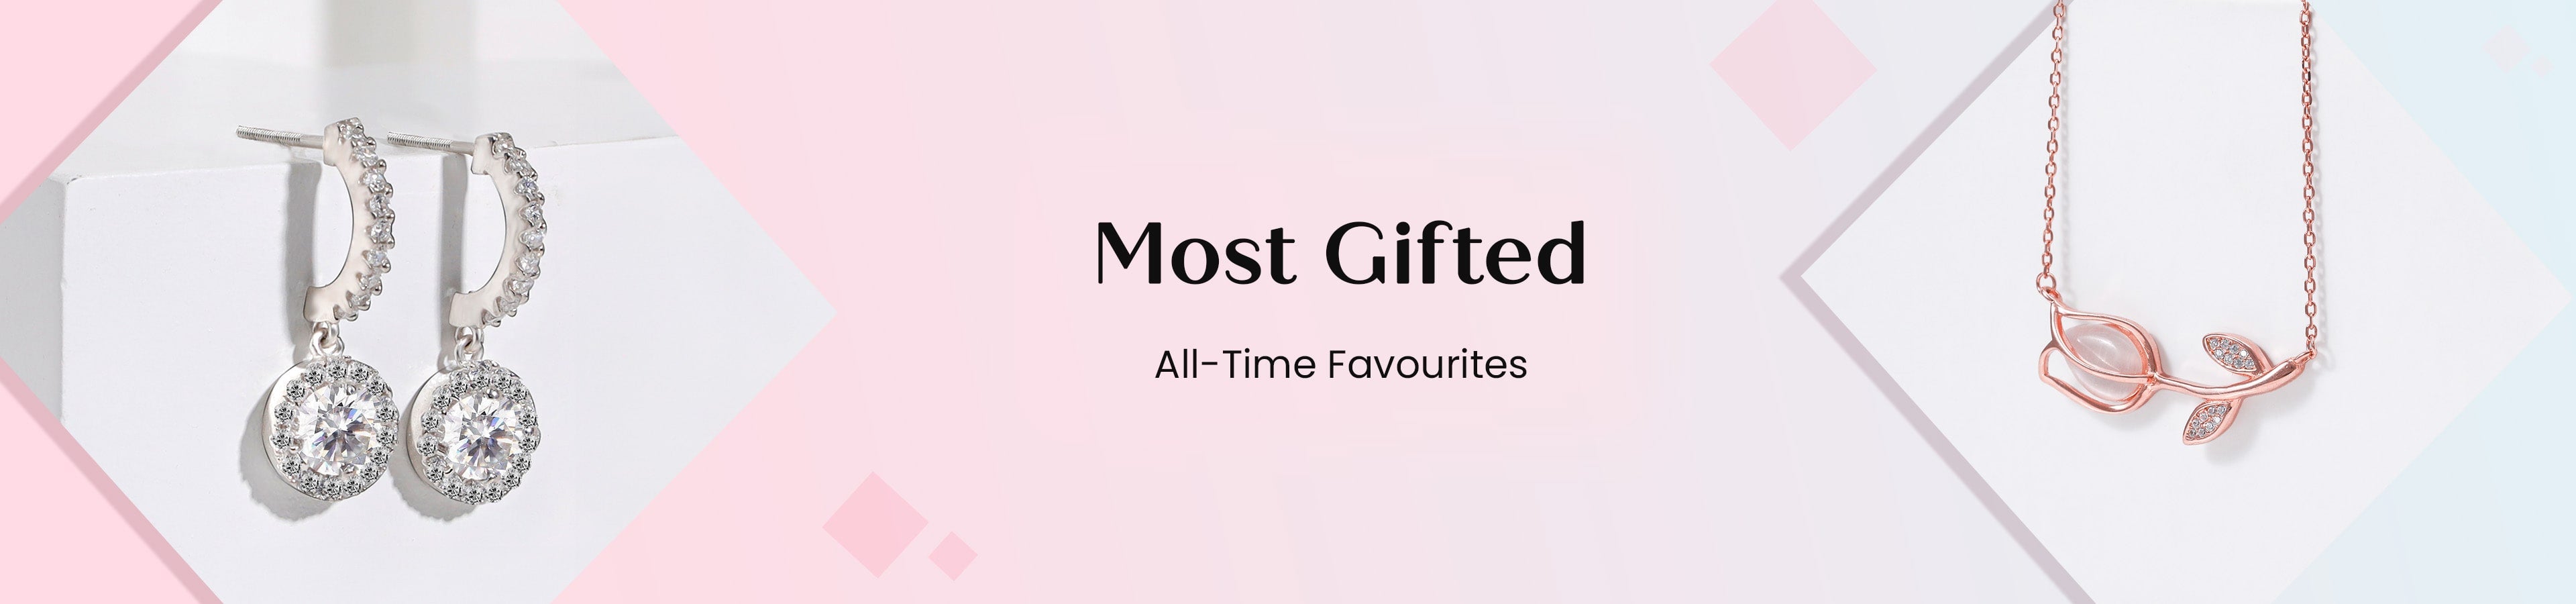 Most Gifted website collection min